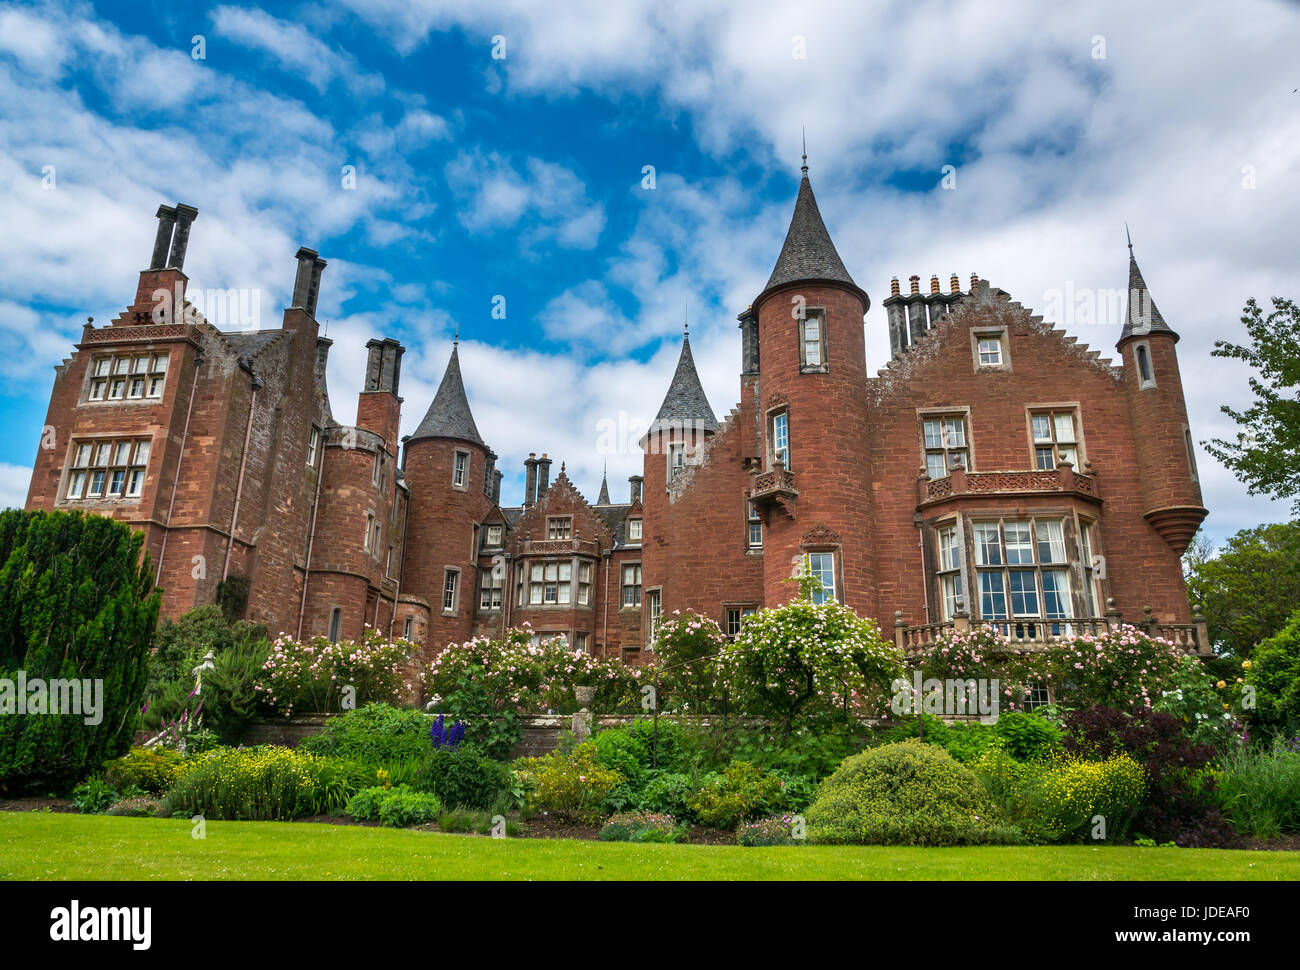 Tyninghame House, Victorian Scottish baronial style mansion and gardens, East Lothian, Scotland, UK, on open day during Scotland's Gardens scheme Stock Photo